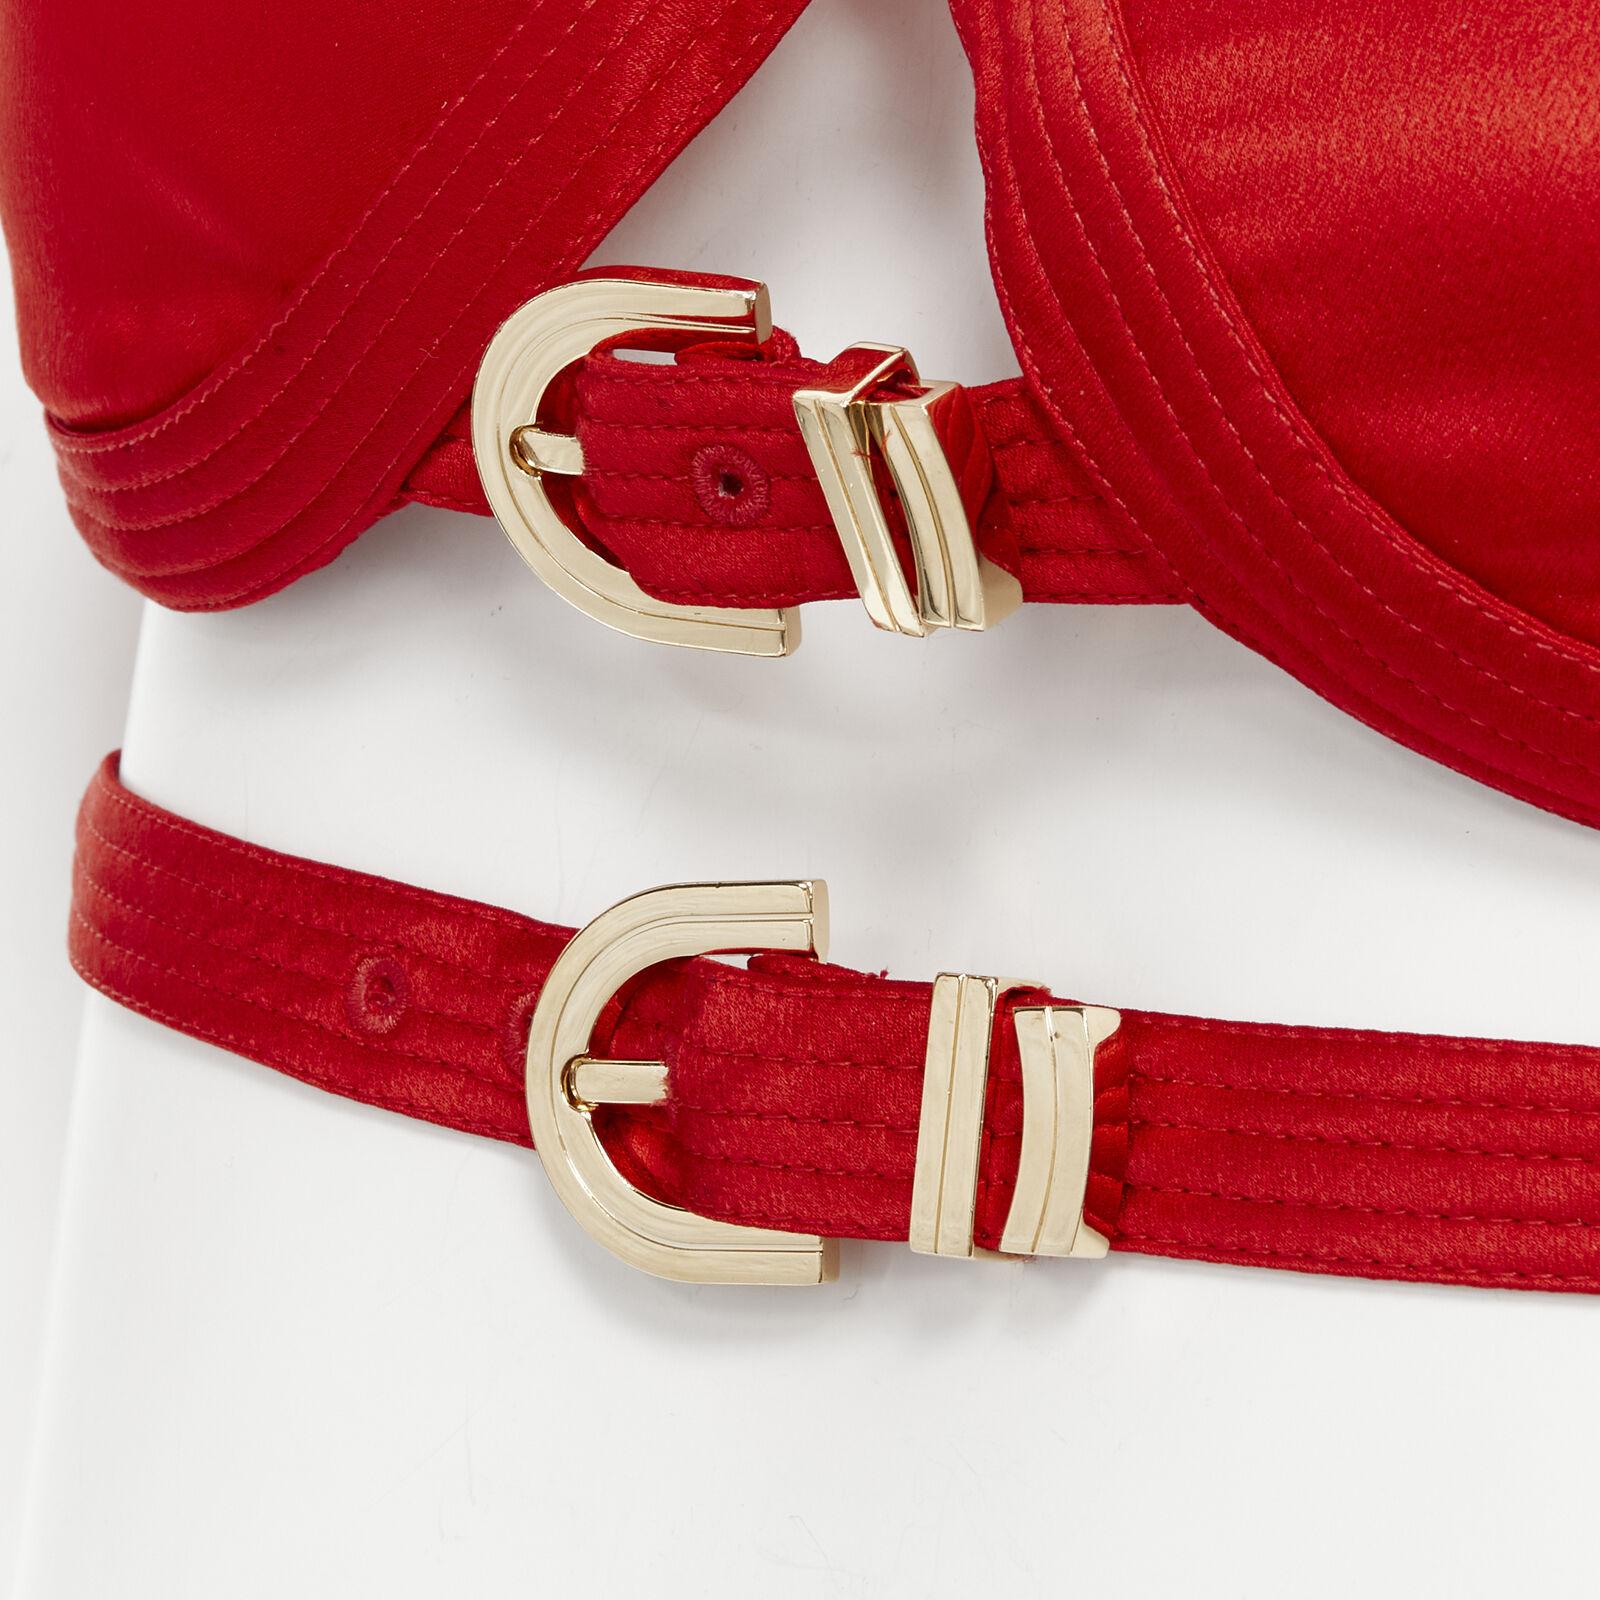 new VERSACE 2019 Runway S&M Bondage Tribute red silk gold buckle bra top IT40 S
Reference: TGAS/B01910
Brand: Versace
Designer: Donatella Versace
Collection: Fall Winter 2019 - Runway
Material: Silk
Color: Red
Pattern: Solid
Closure: Buckle
Extra